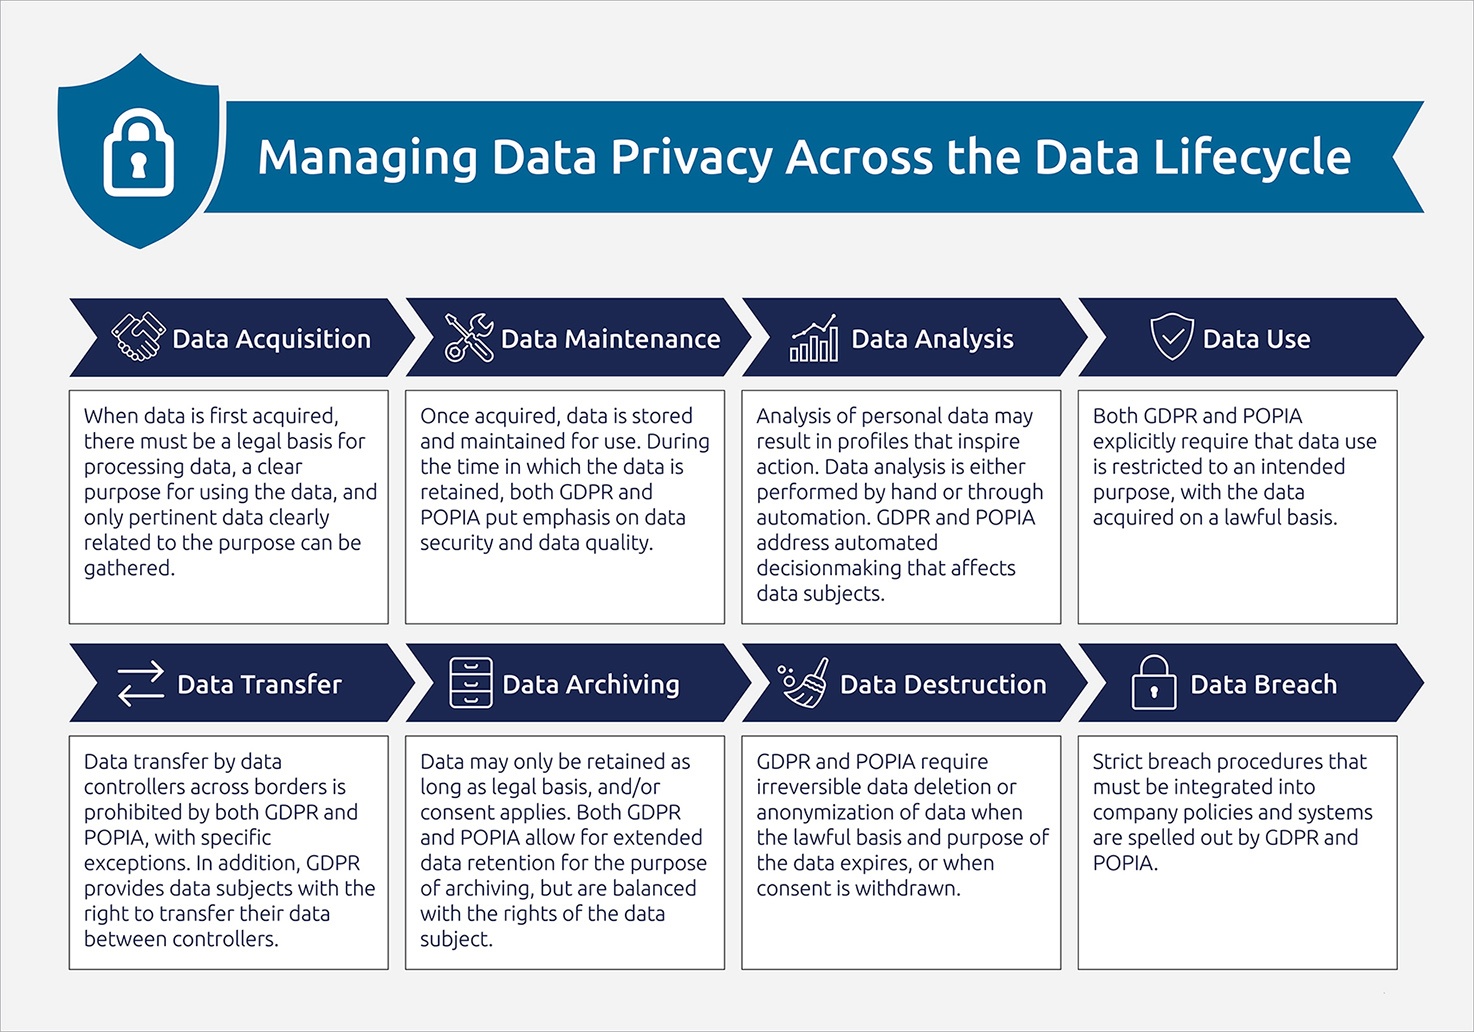 popia-manage-data-privacy-data-lifecycle